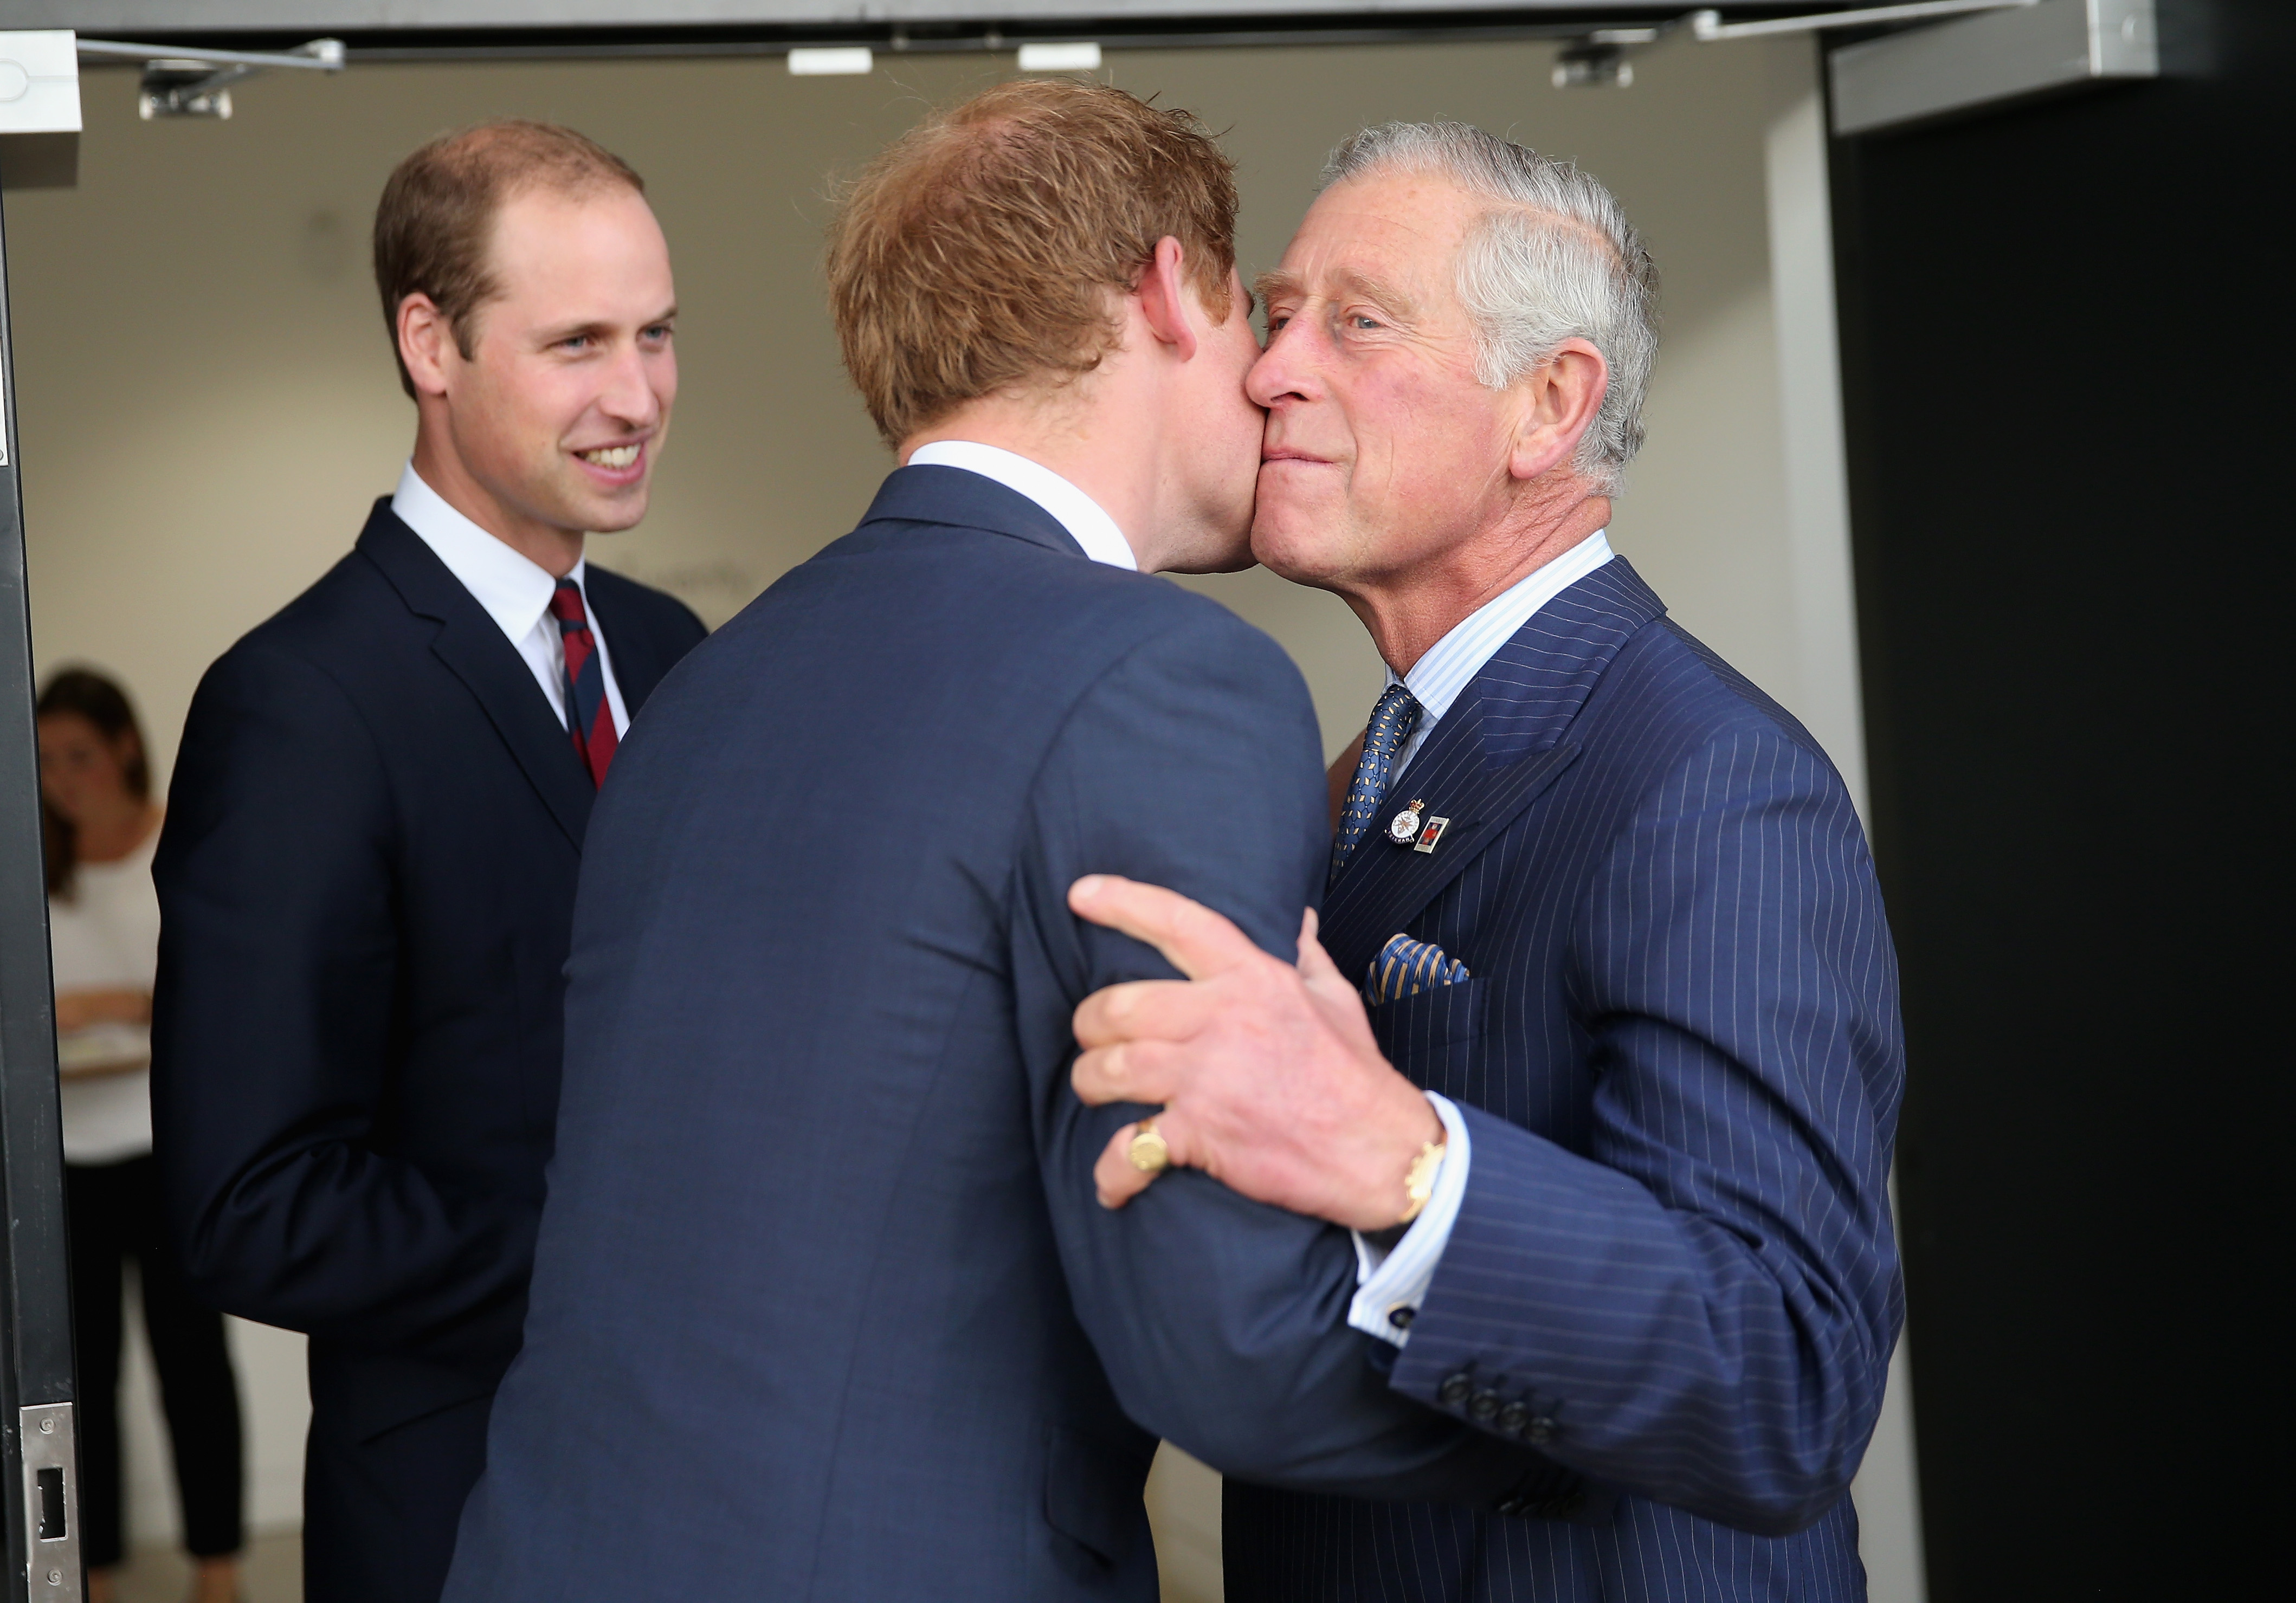 King Charles with his sons Prince Harry and Prince William during the Invictus Games Opening Ceremony on September 10, 2014 in London, England | Source: Getty Images